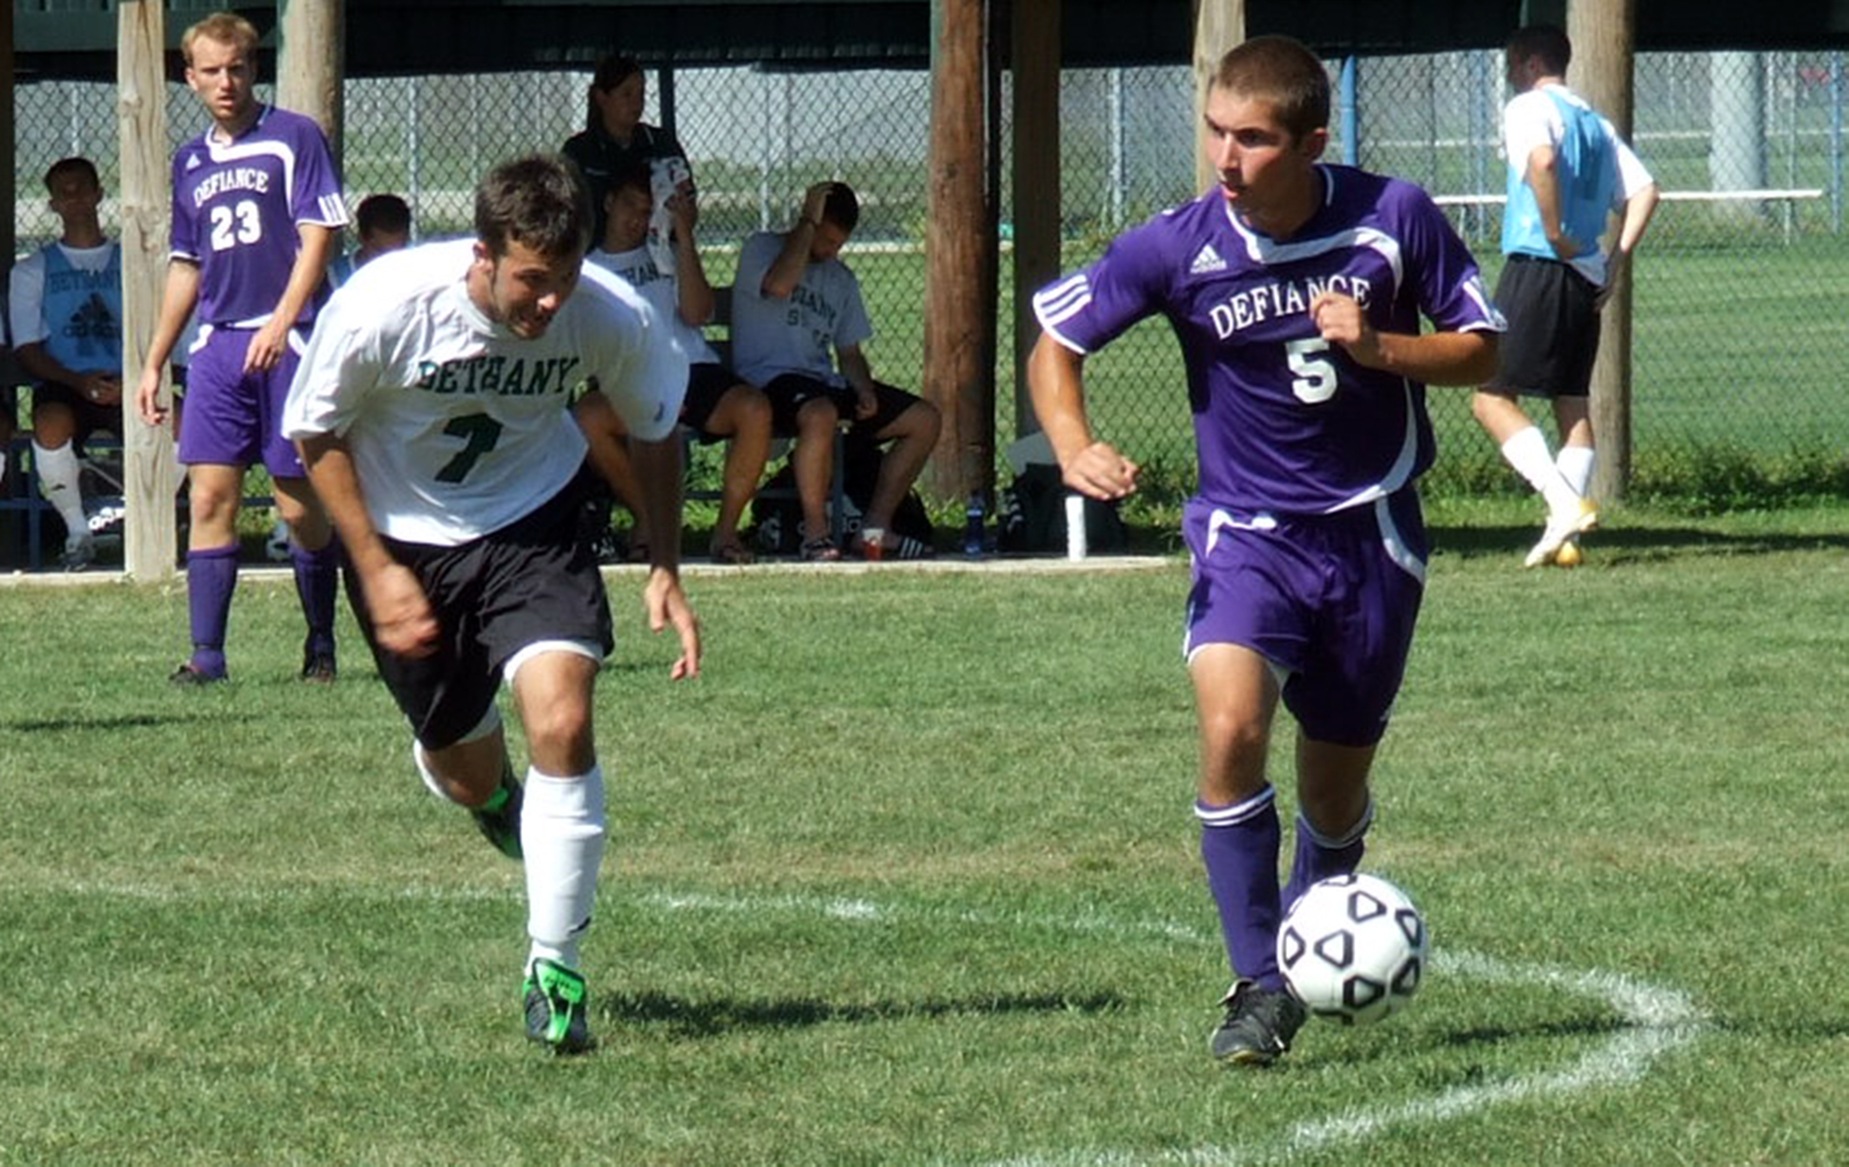 Defiance Falls to Kalamazoo in Opening Game of DC Classic